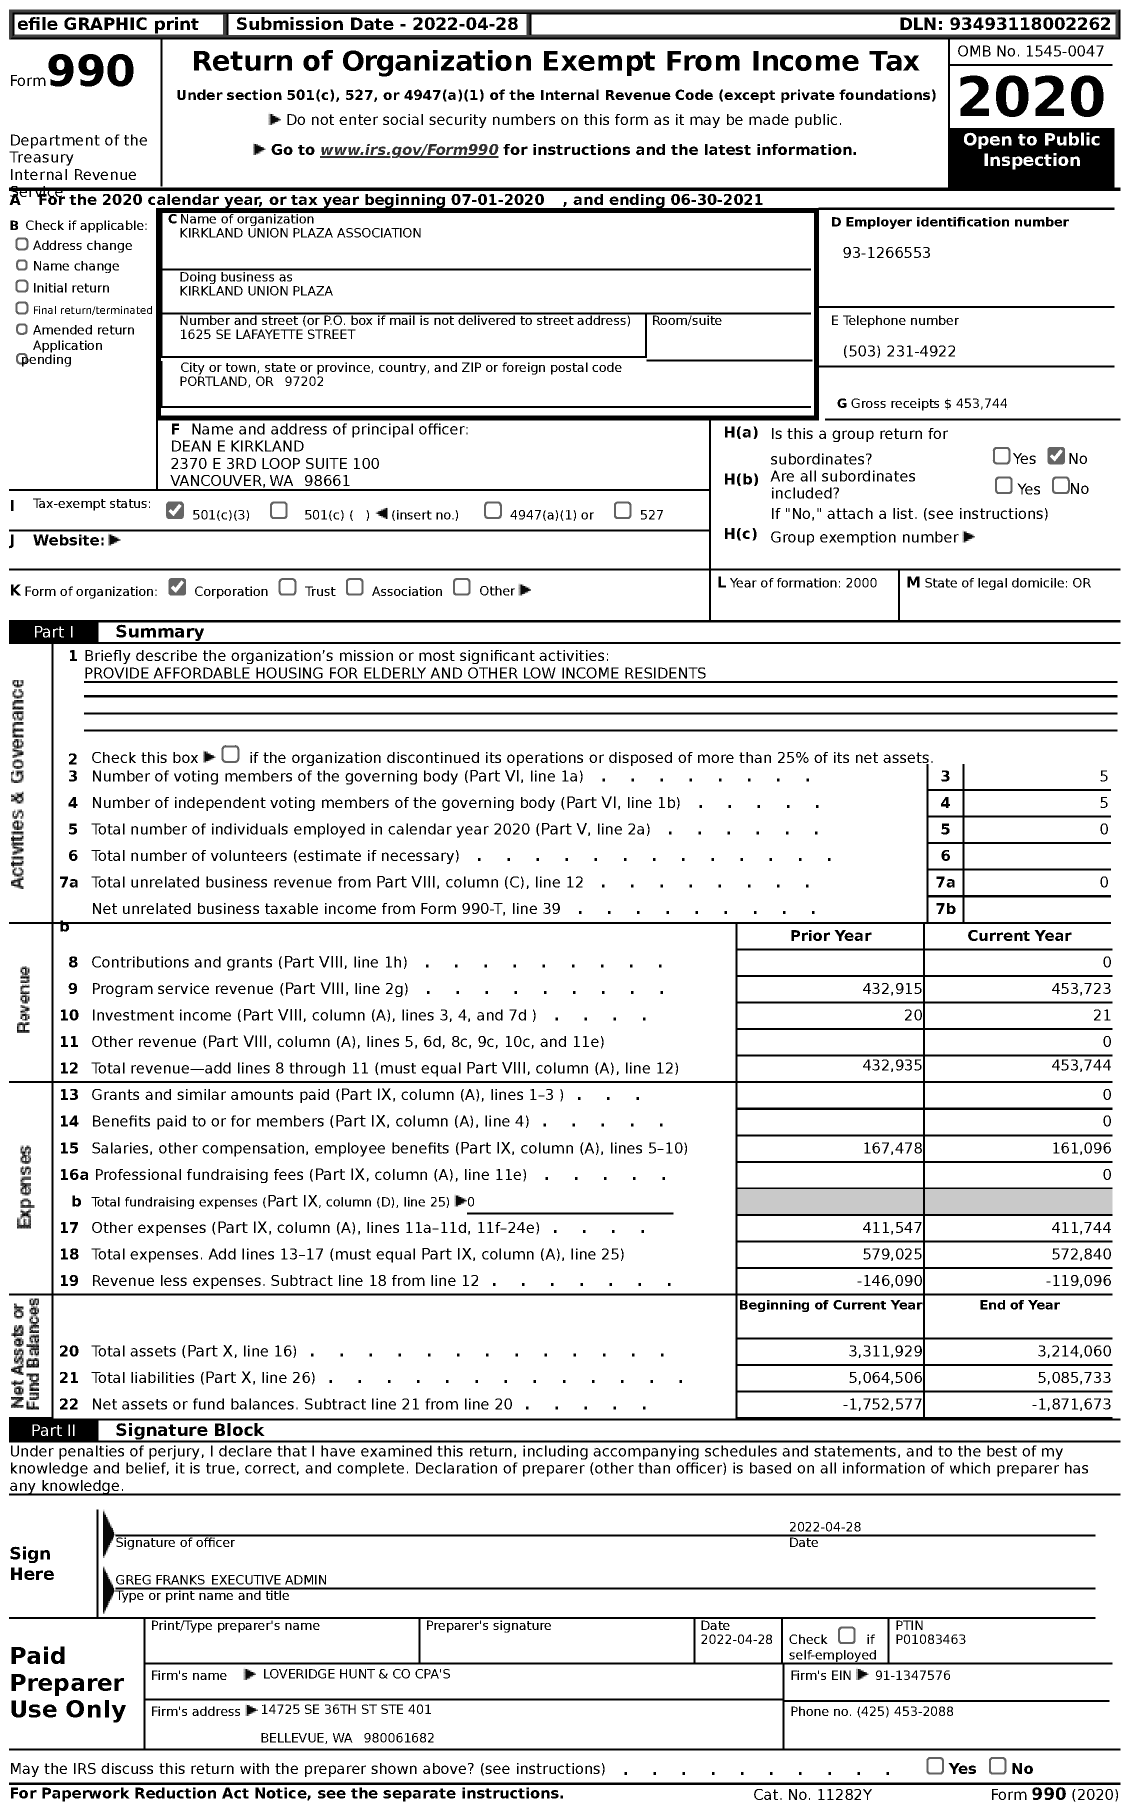 Image of first page of 2020 Form 990 for Kirkland Union Plaza